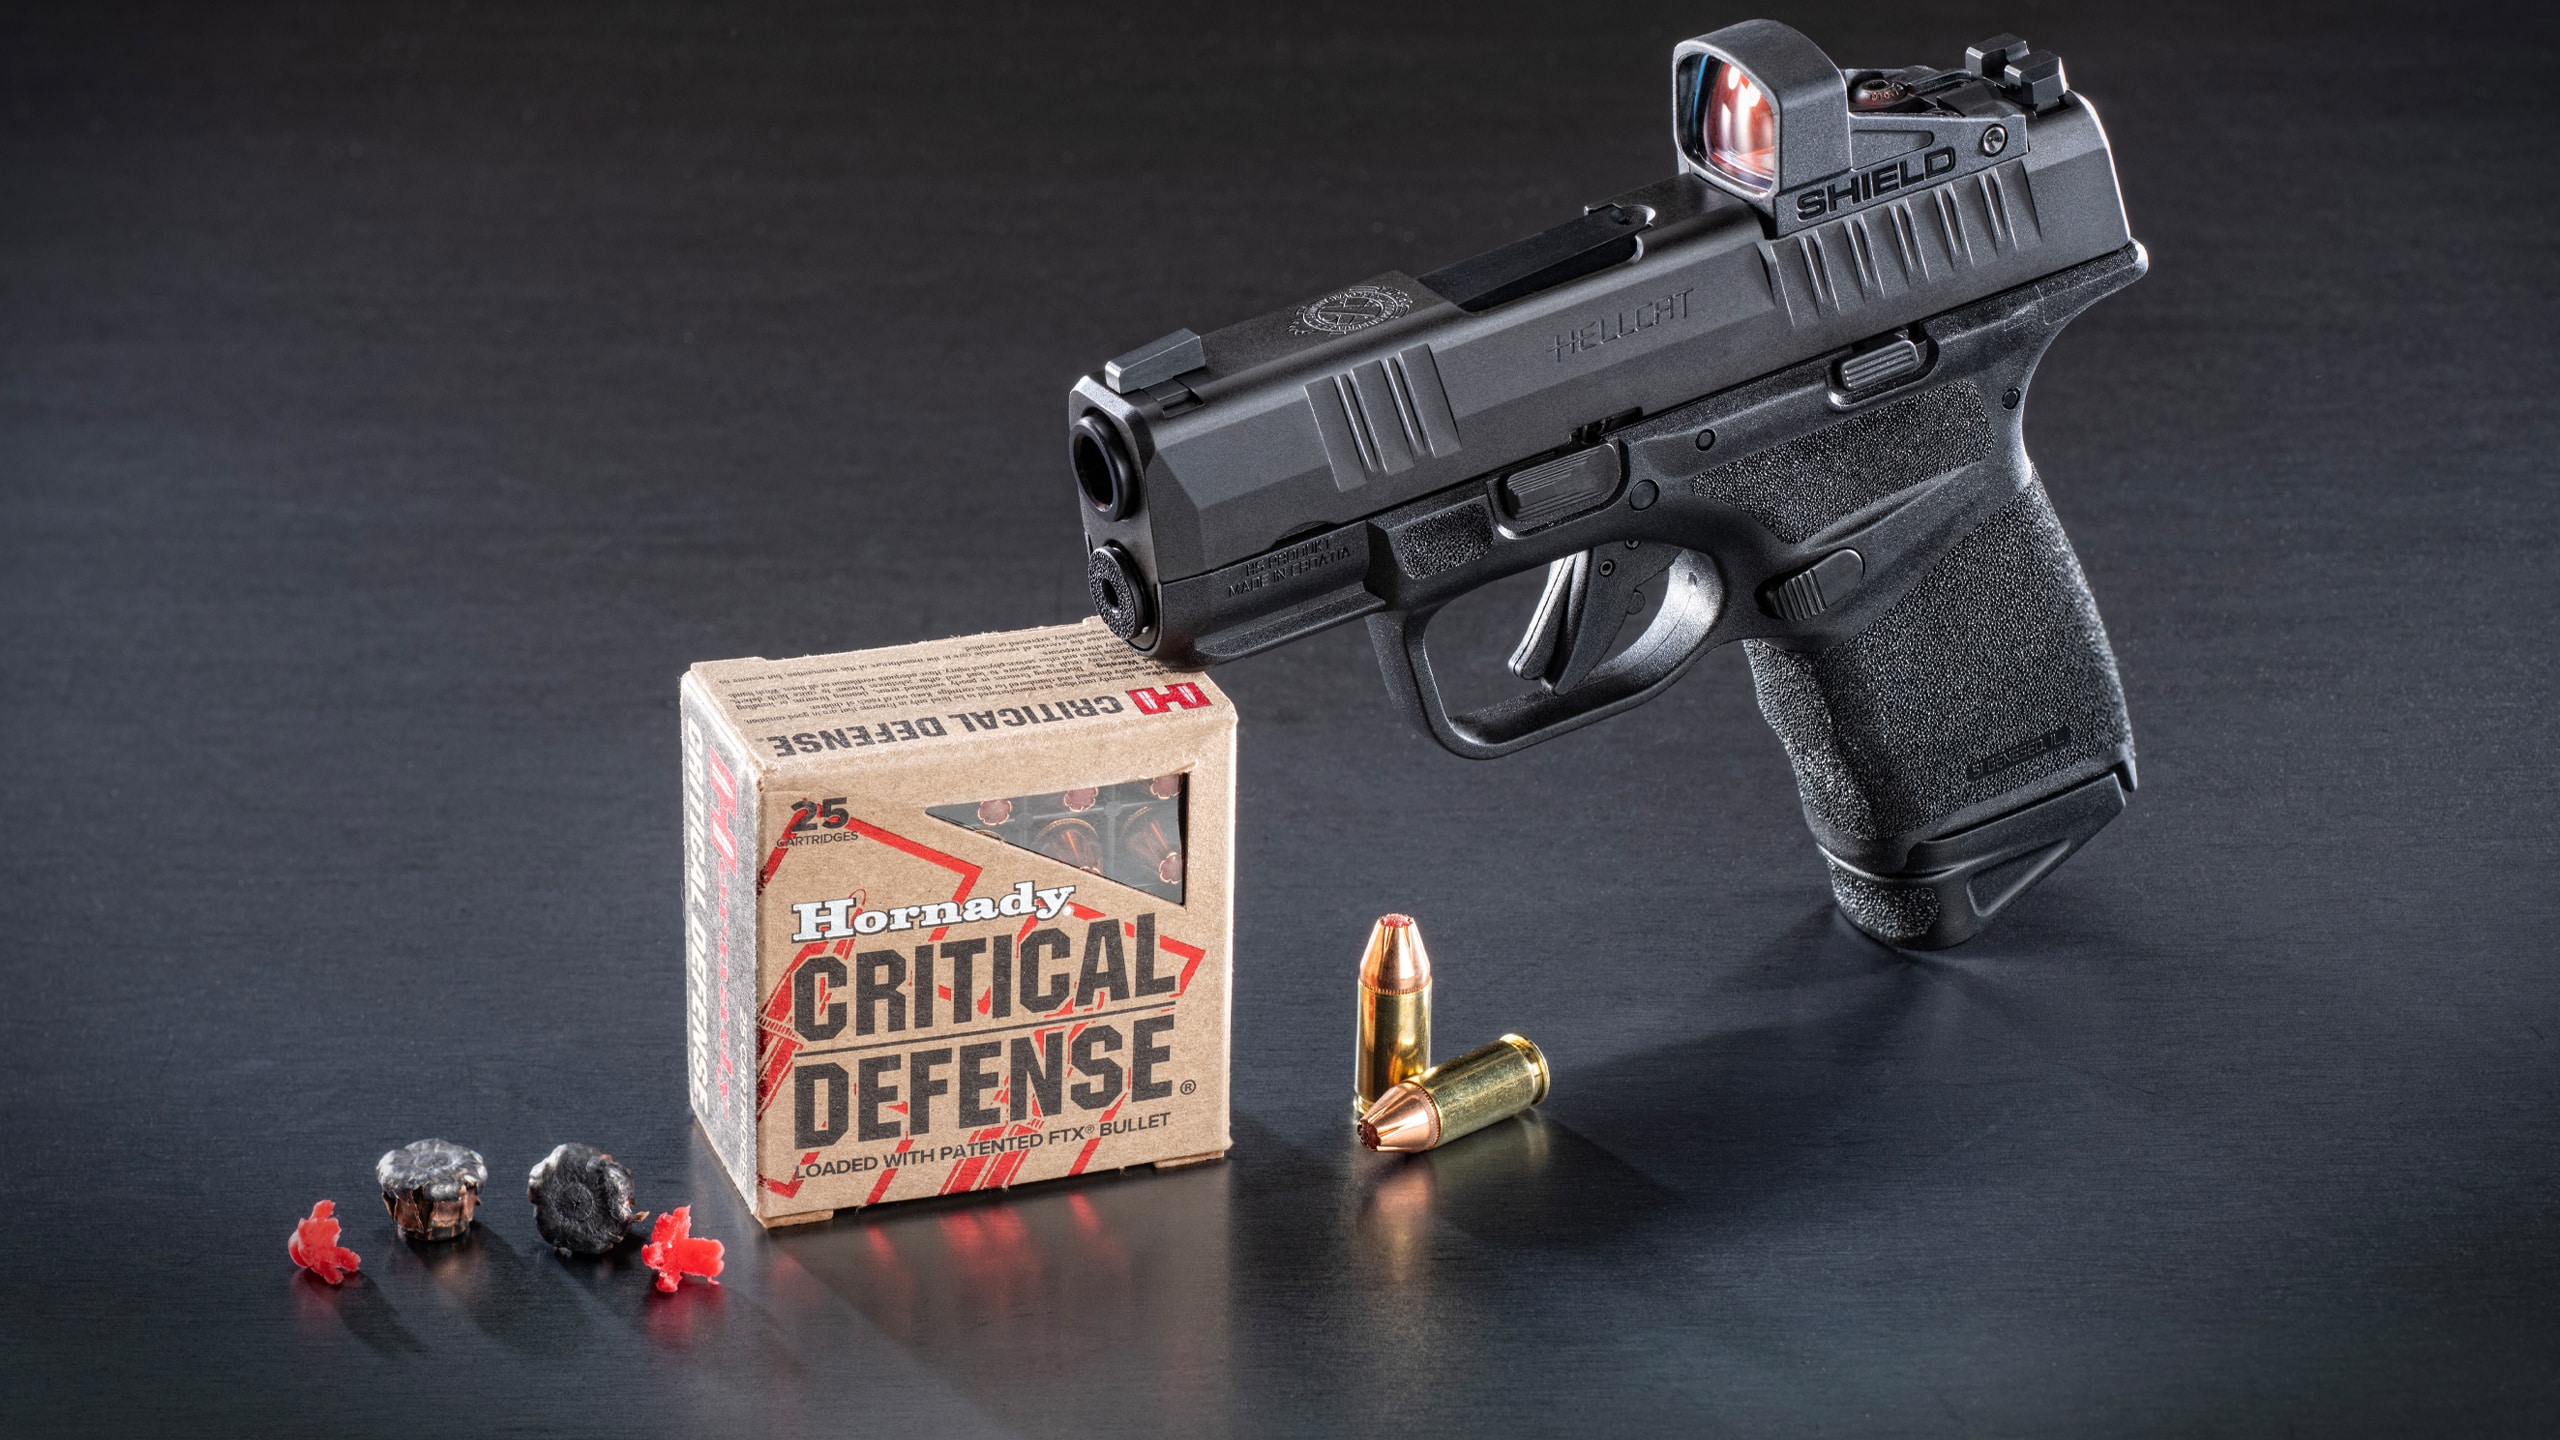 https://www.thearmorylife.com/wp-content/uploads/2023/07/hornady-critical-defense-9mm-review.jpg